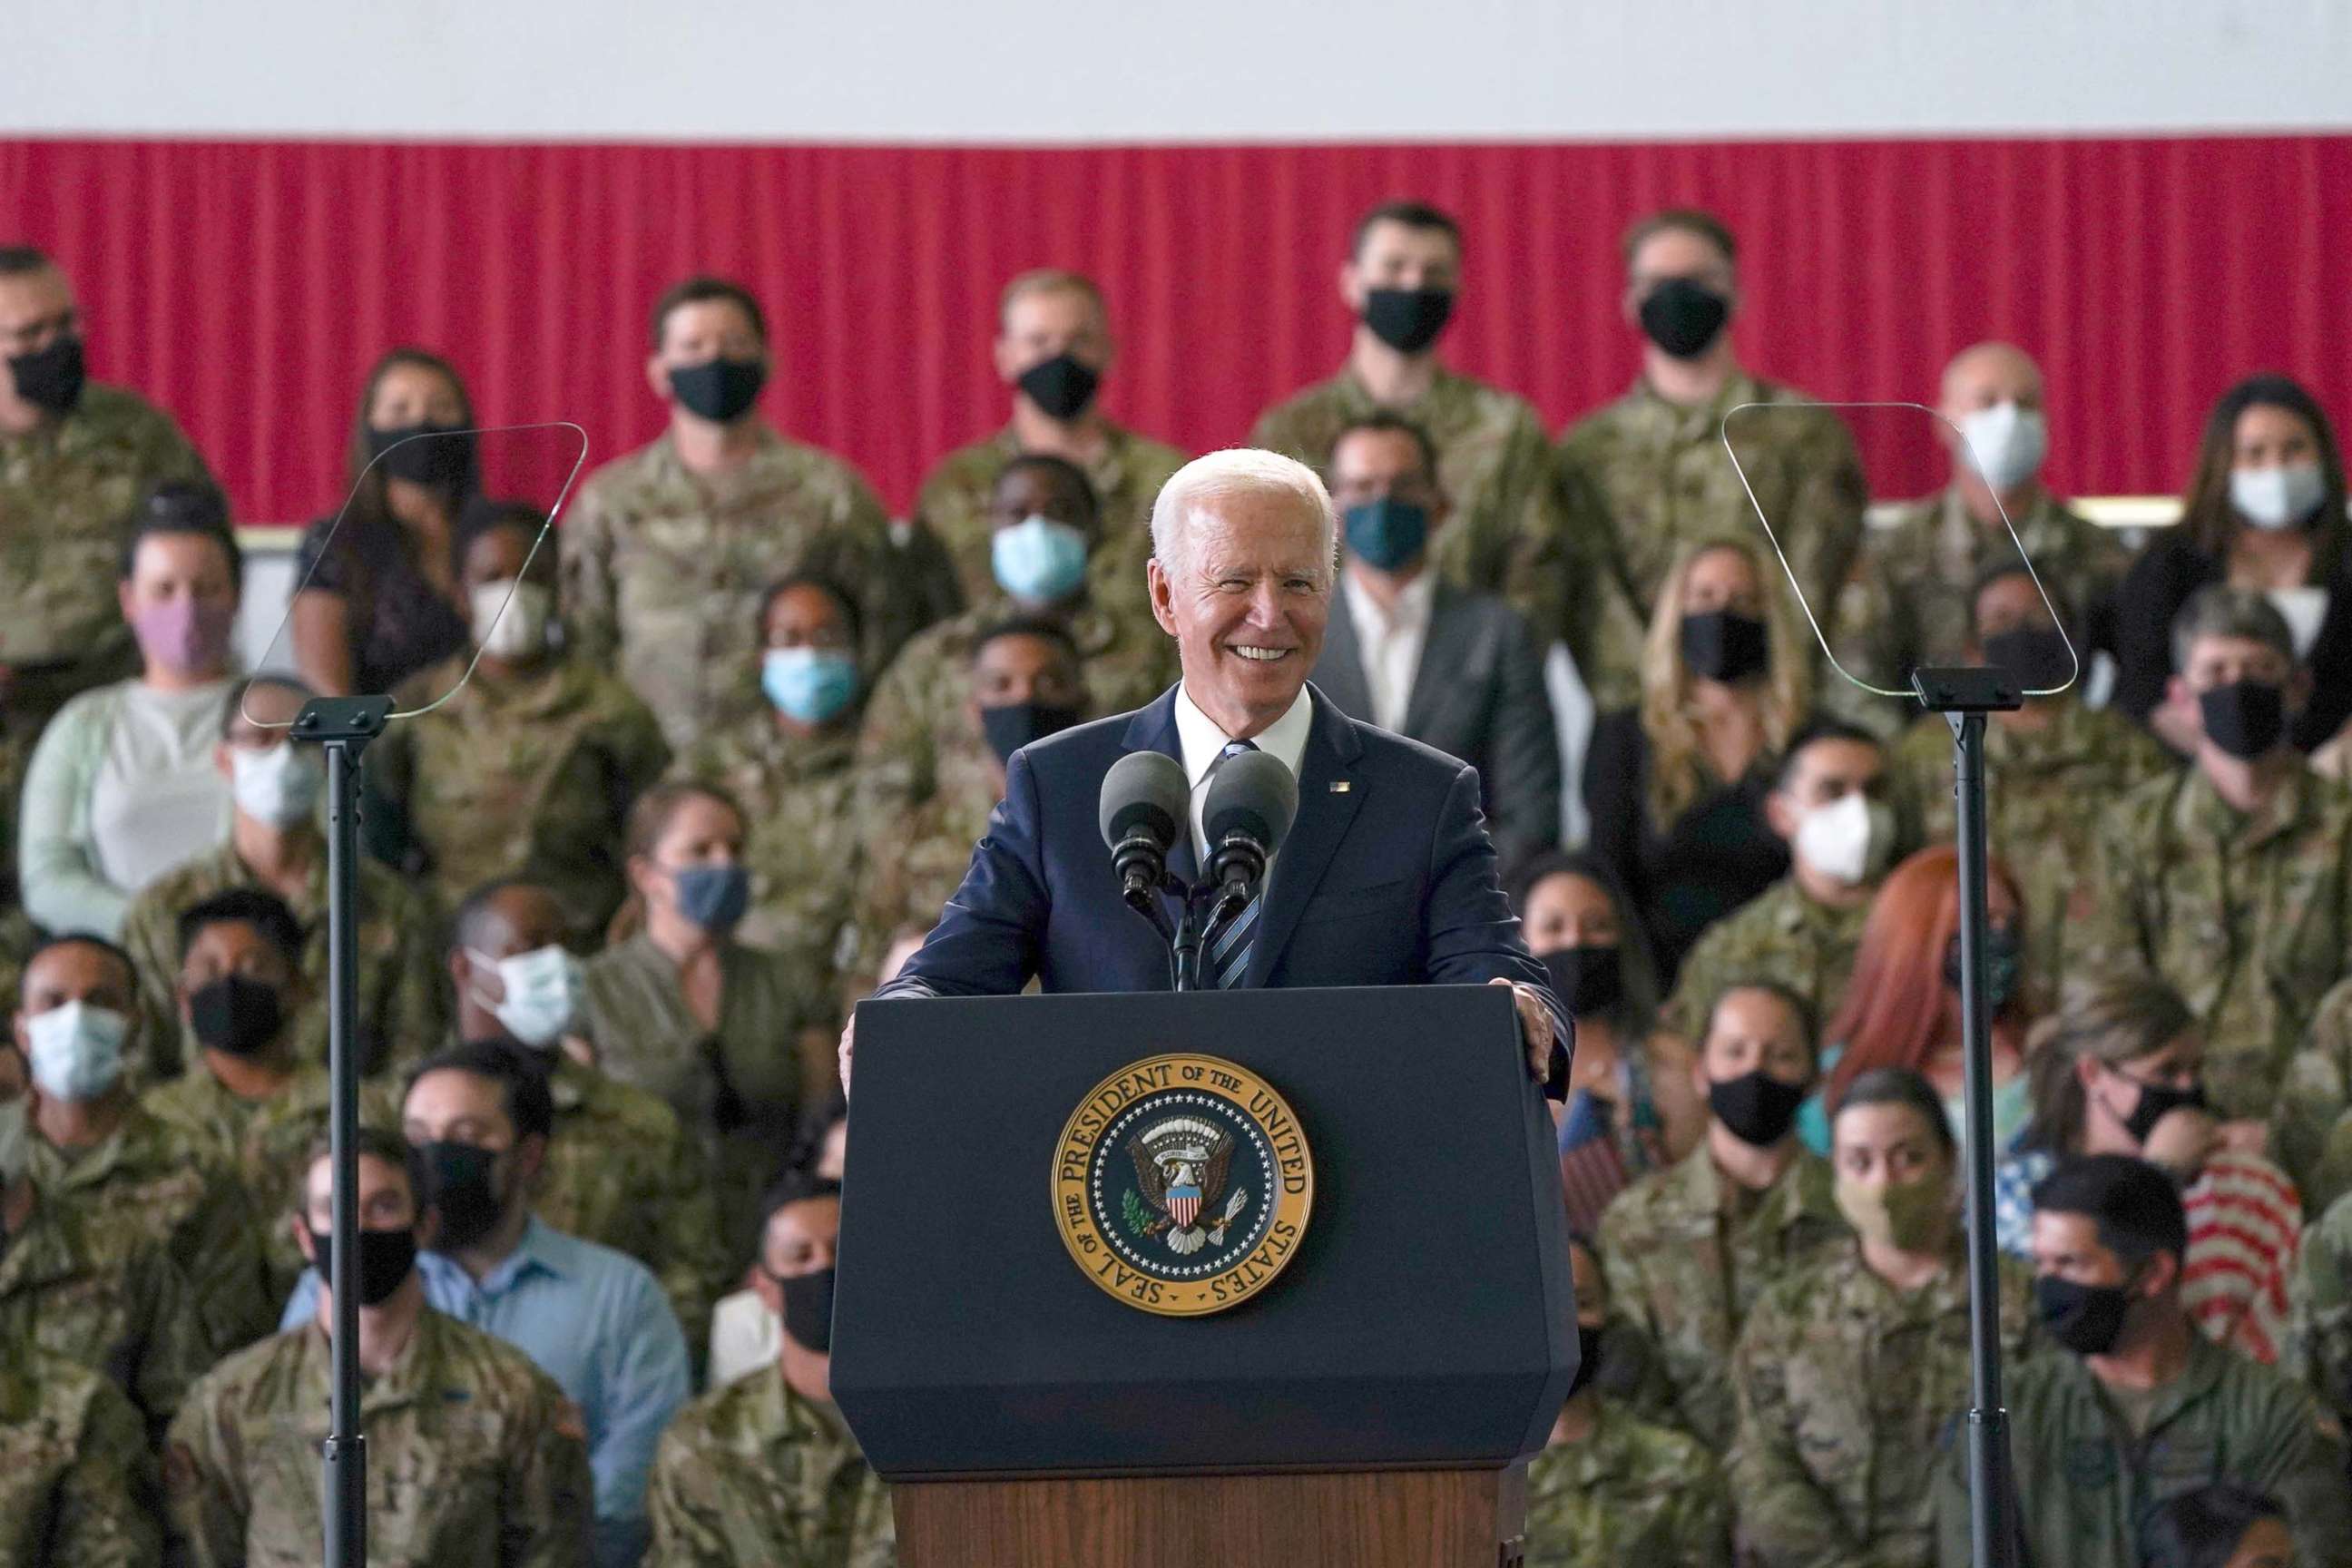 PHOTO: President Joe Biden addresses US Air Force personnel at RAF Mildenhall in Suffolk, ahead of the G7 summit in Cornwall, June 9, 2021 in Mildenhall, England.